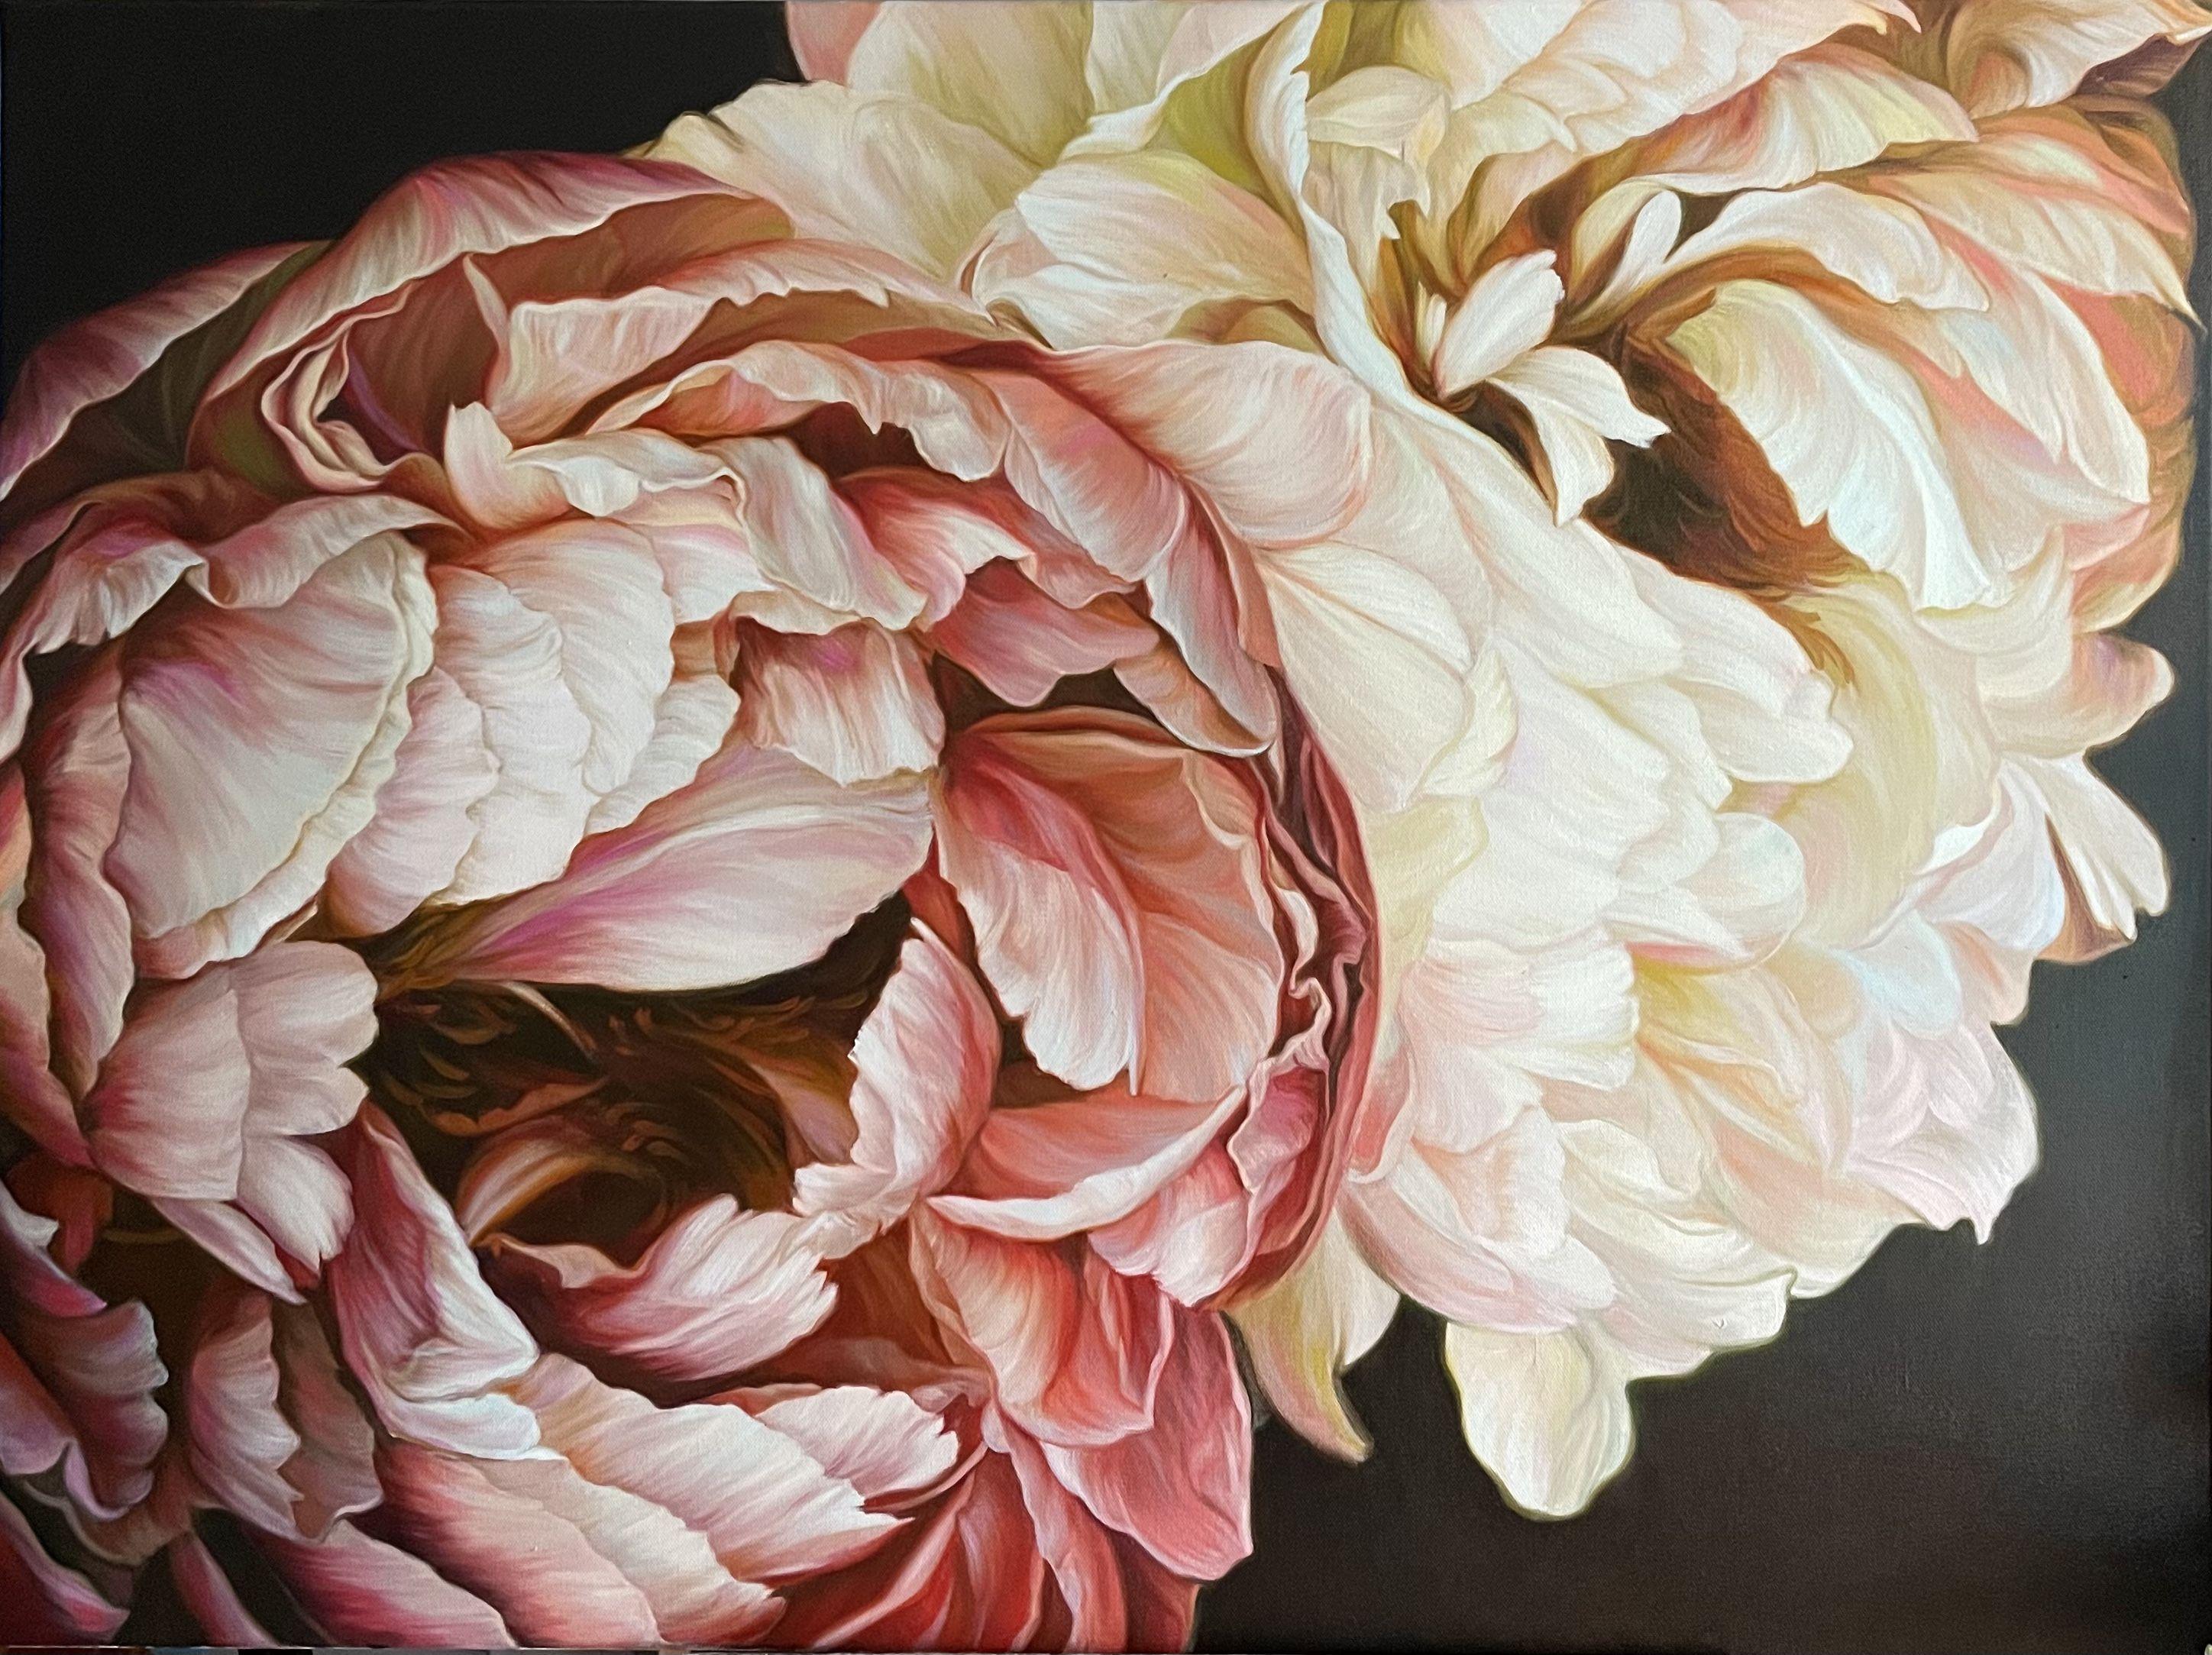 Duet of Peonies 2 . The year of creation is 2022 . Oil on canvas, signature on the reverse side :: Painting :: Realism :: This piece comes with an official certificate of authenticity signed by the artist :: Ready to Hang: Yes :: Signed: Yes ::